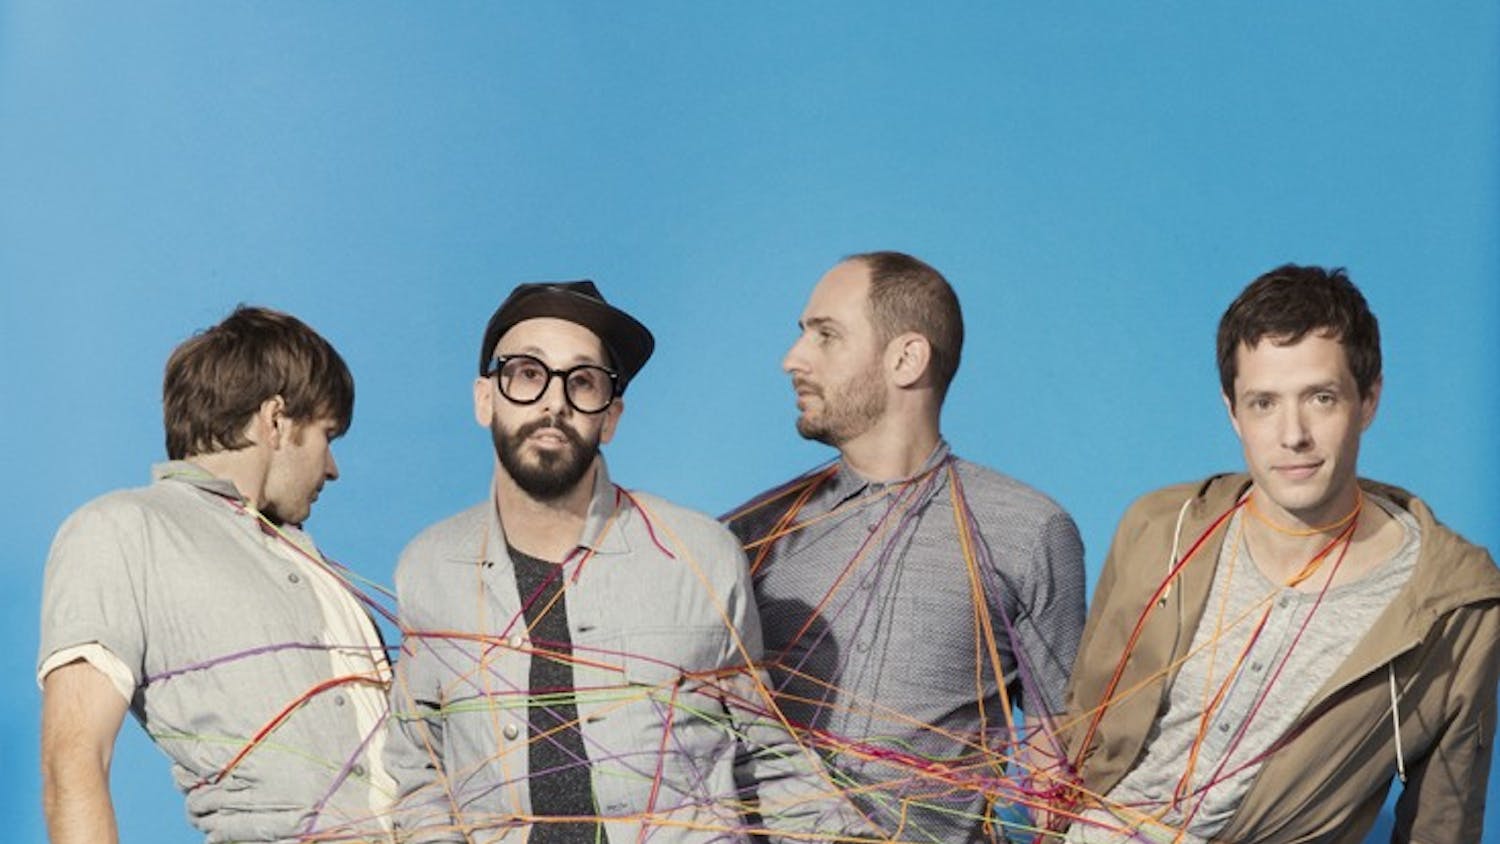 The band OK Go is coming to the Bluebird on Sunday at 8 p.m.